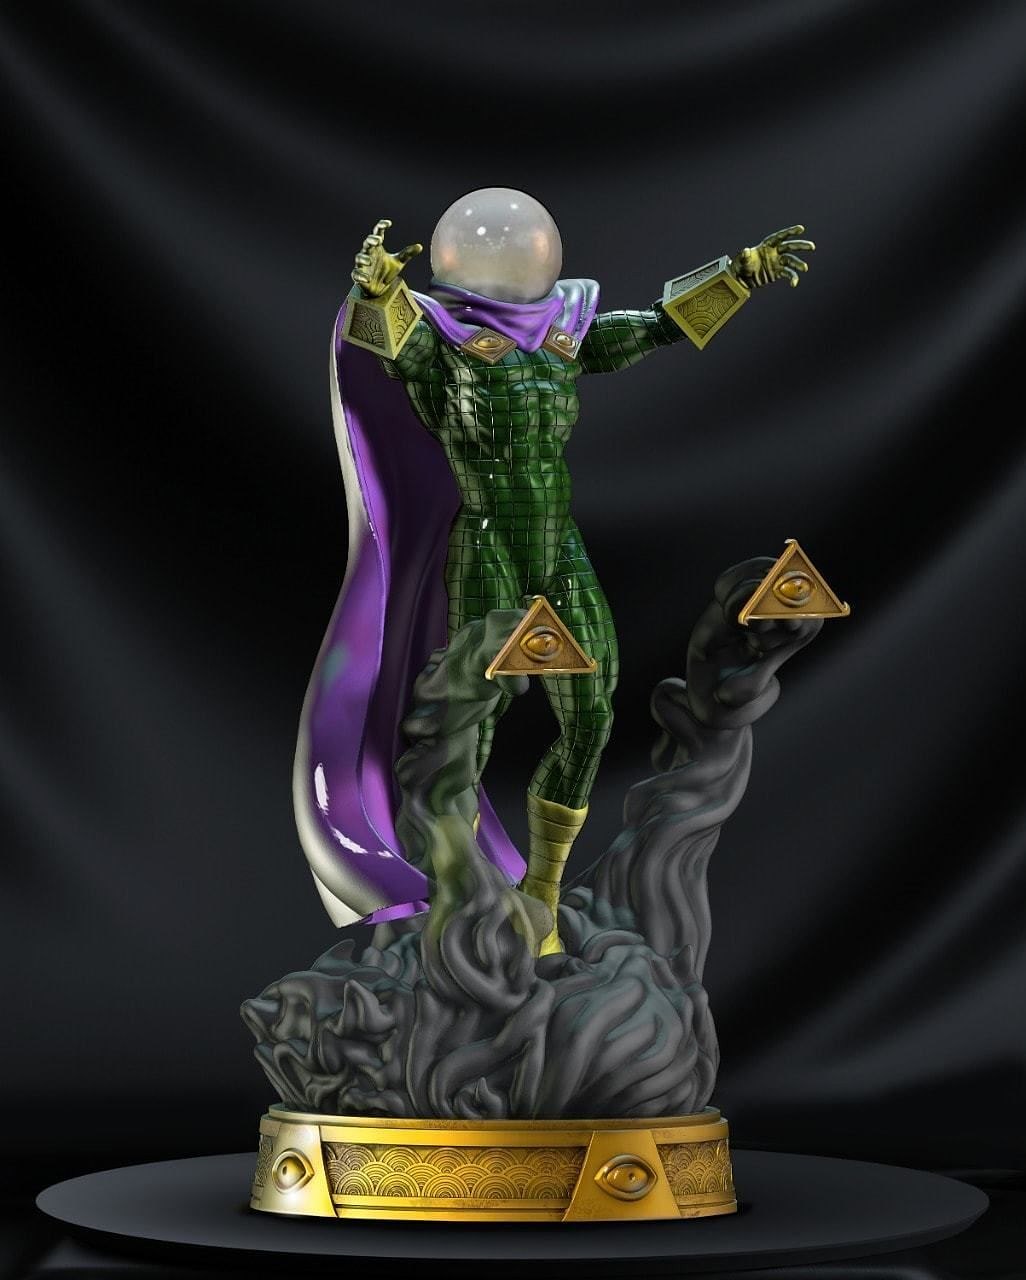 Mysterio from Spiderman